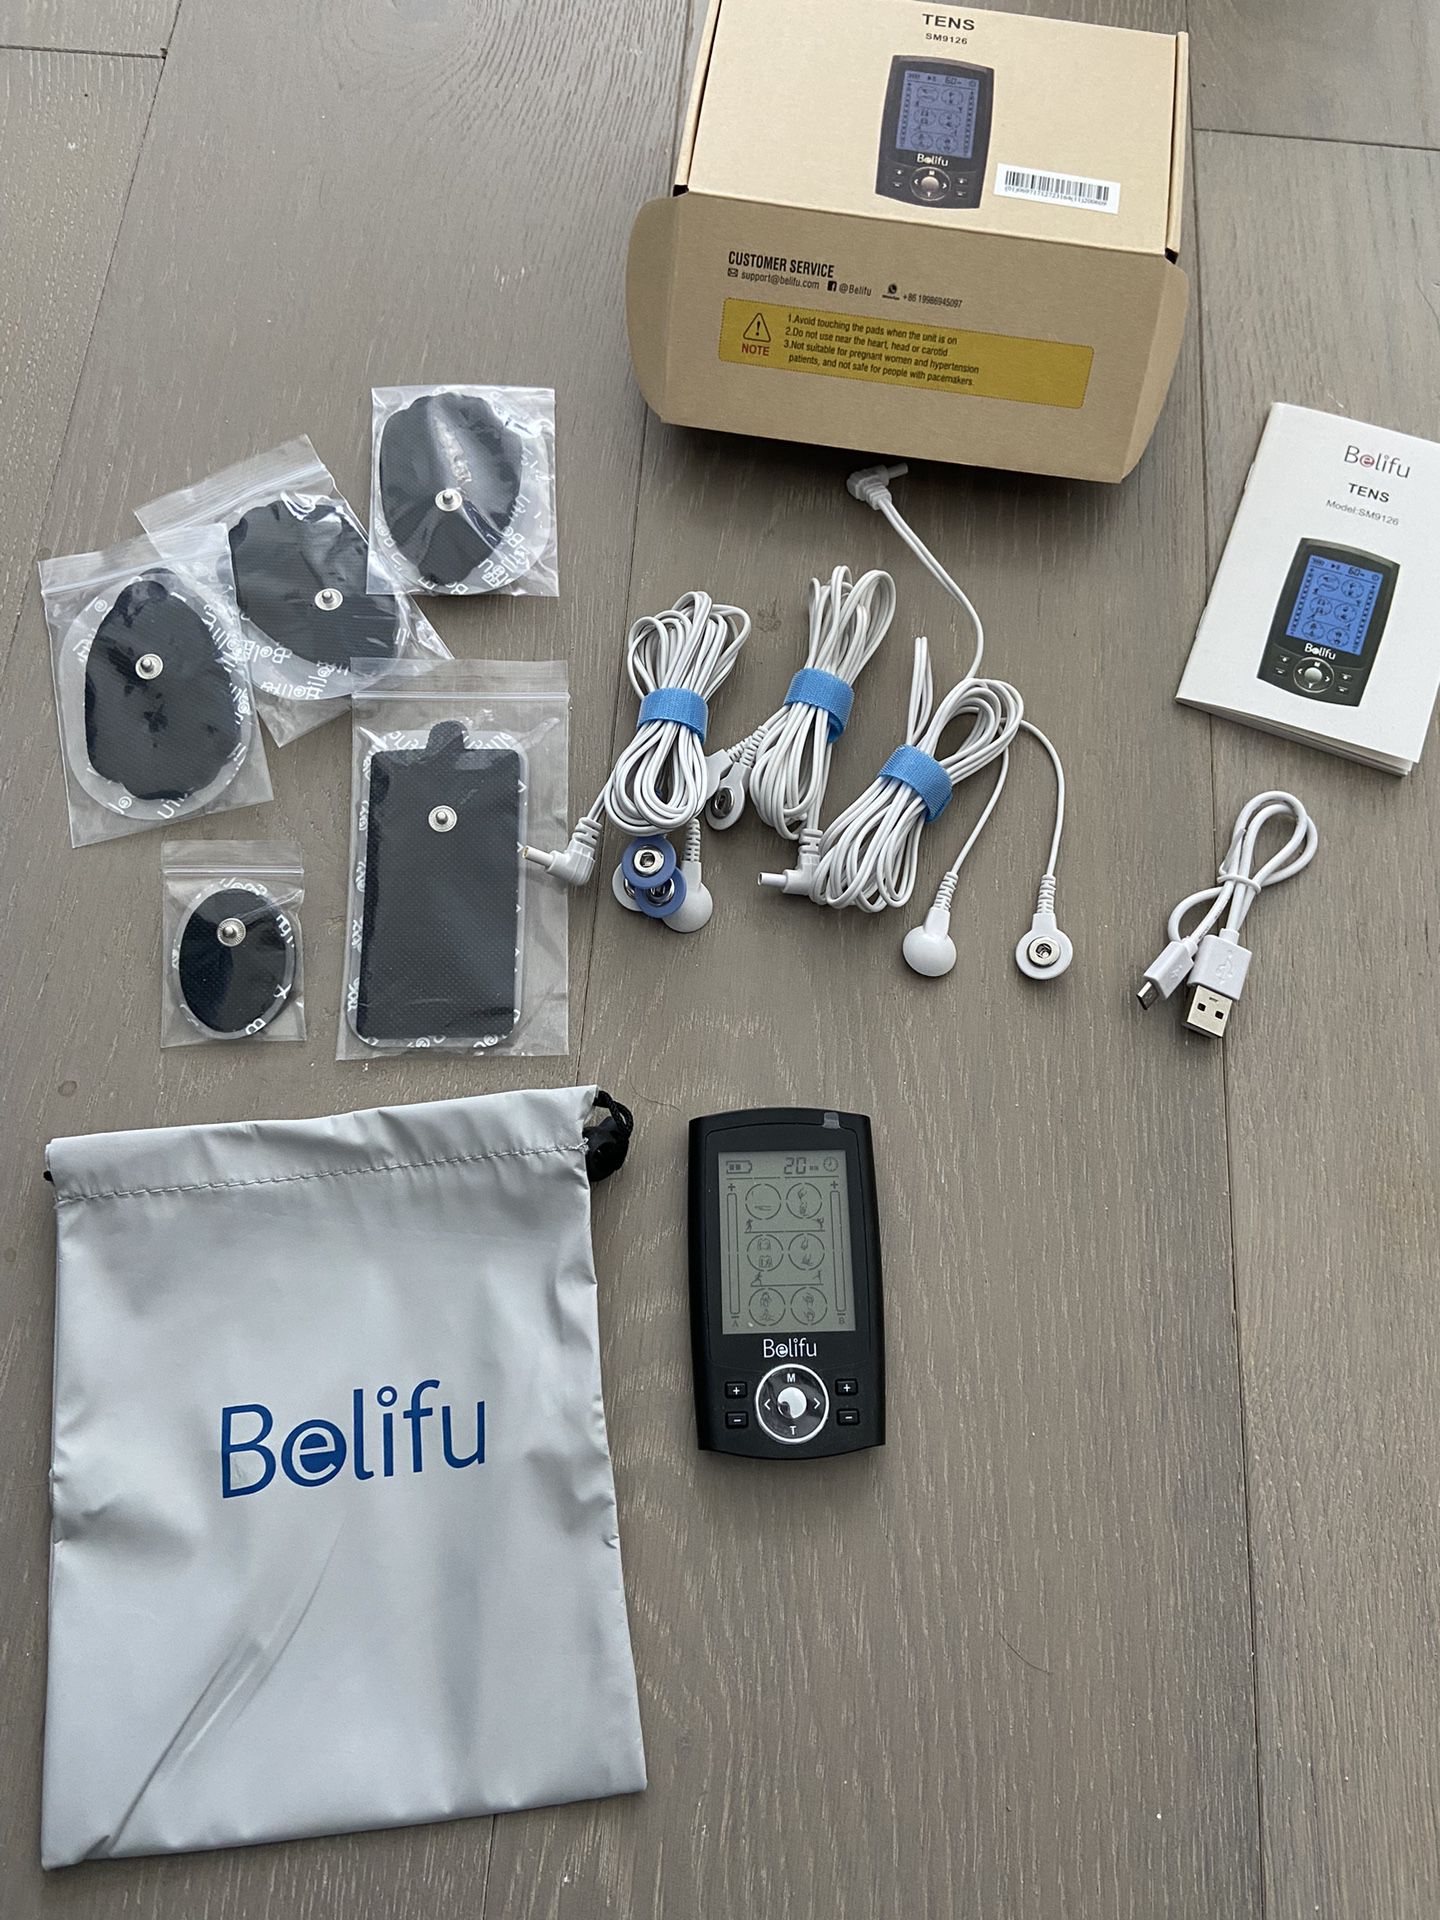 Belifu Dual Channel TENS EMS Unit for Sale in New York, NY - OfferUp